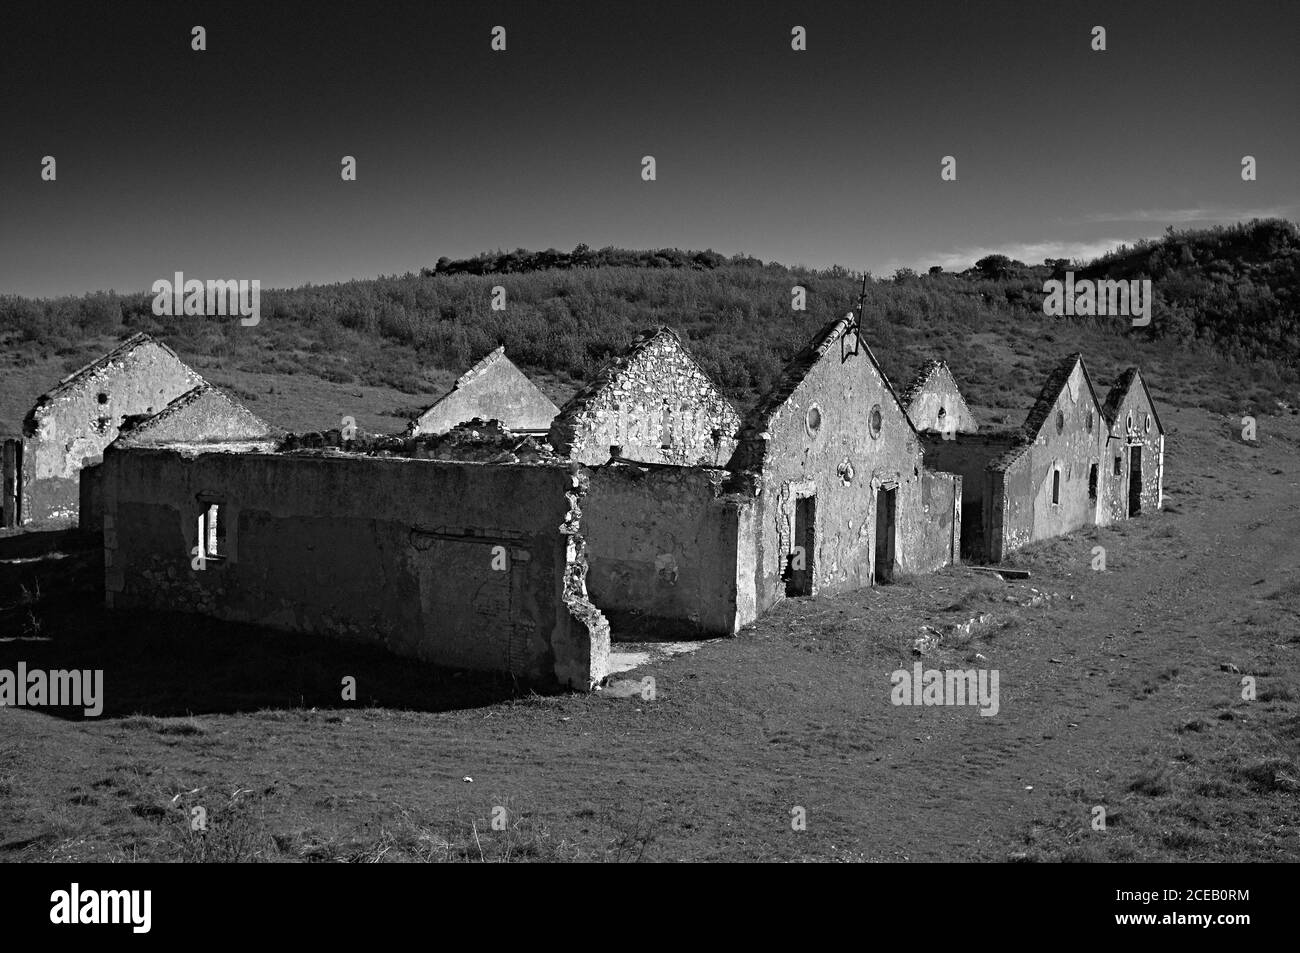 Abandoned half ruined buildings made of stone standing in vast field in black and white colors Stock Photo